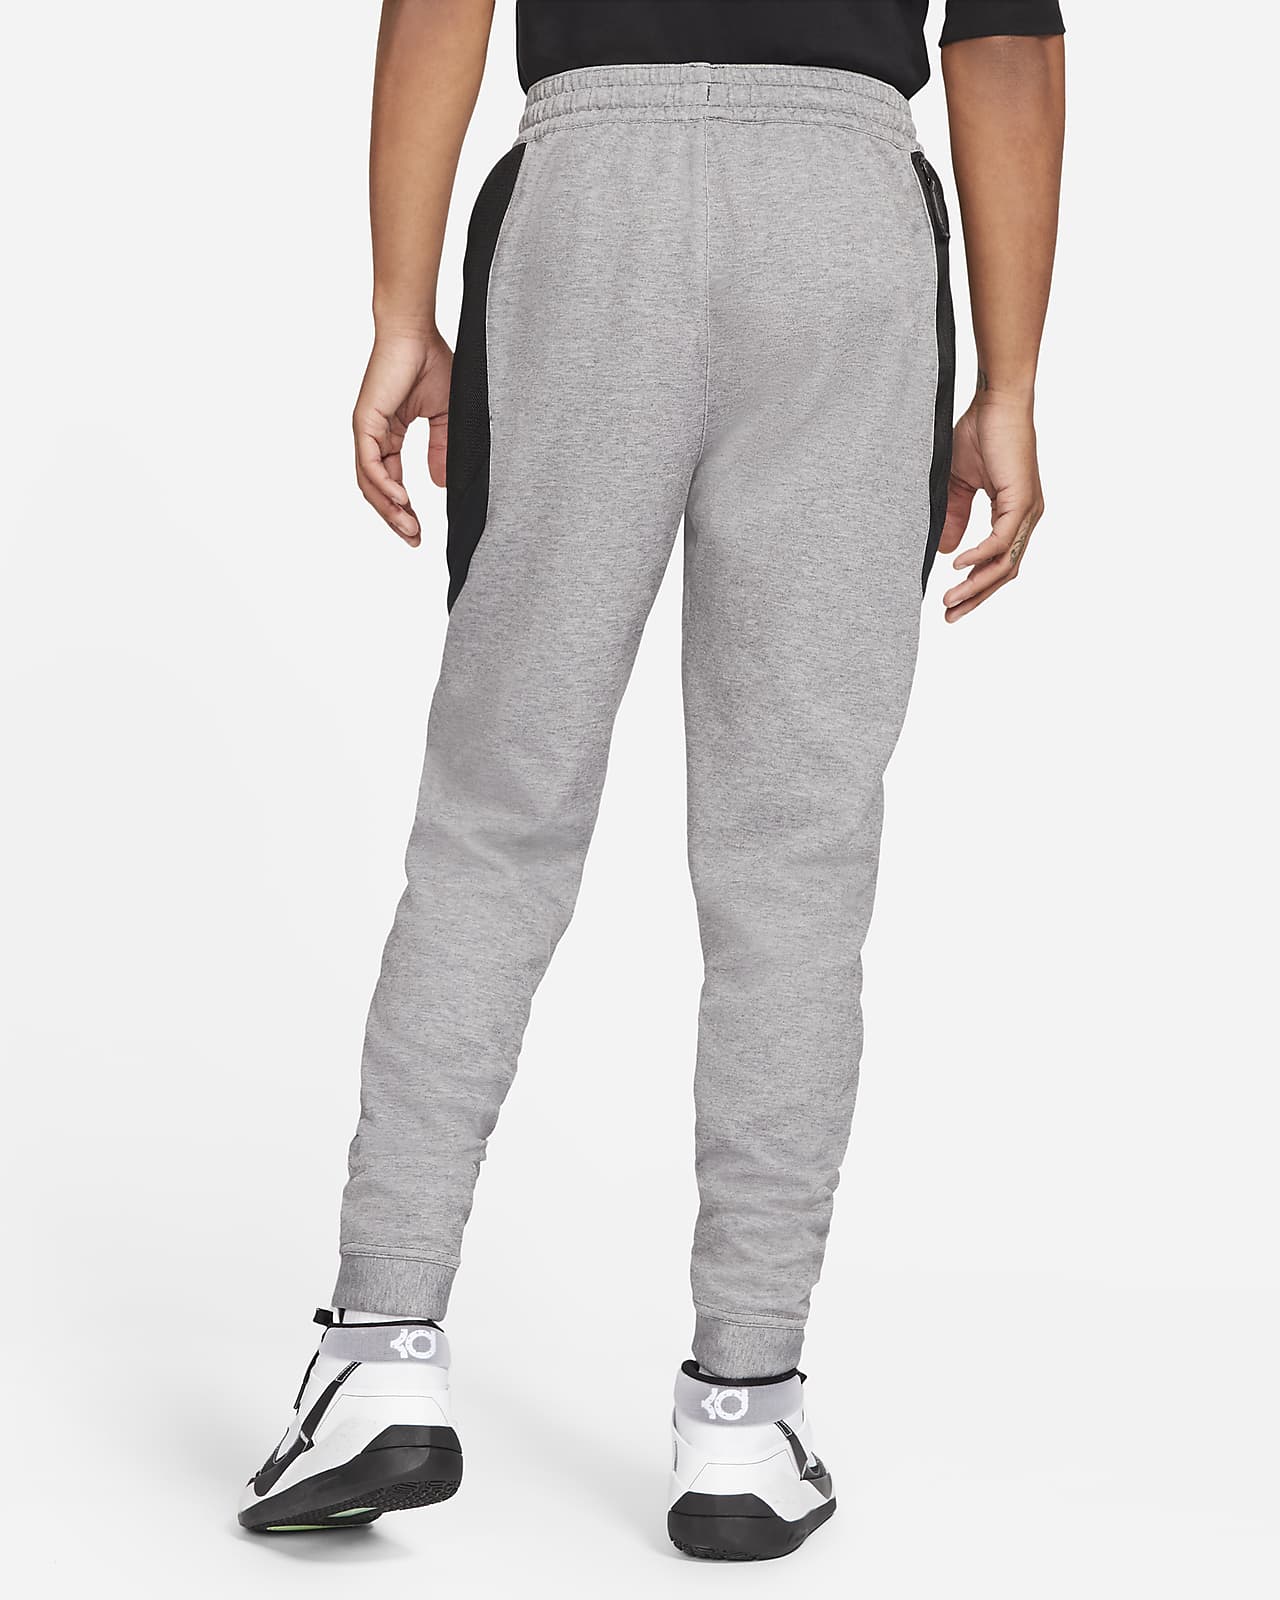 nike basketball pants with zipper at ankle